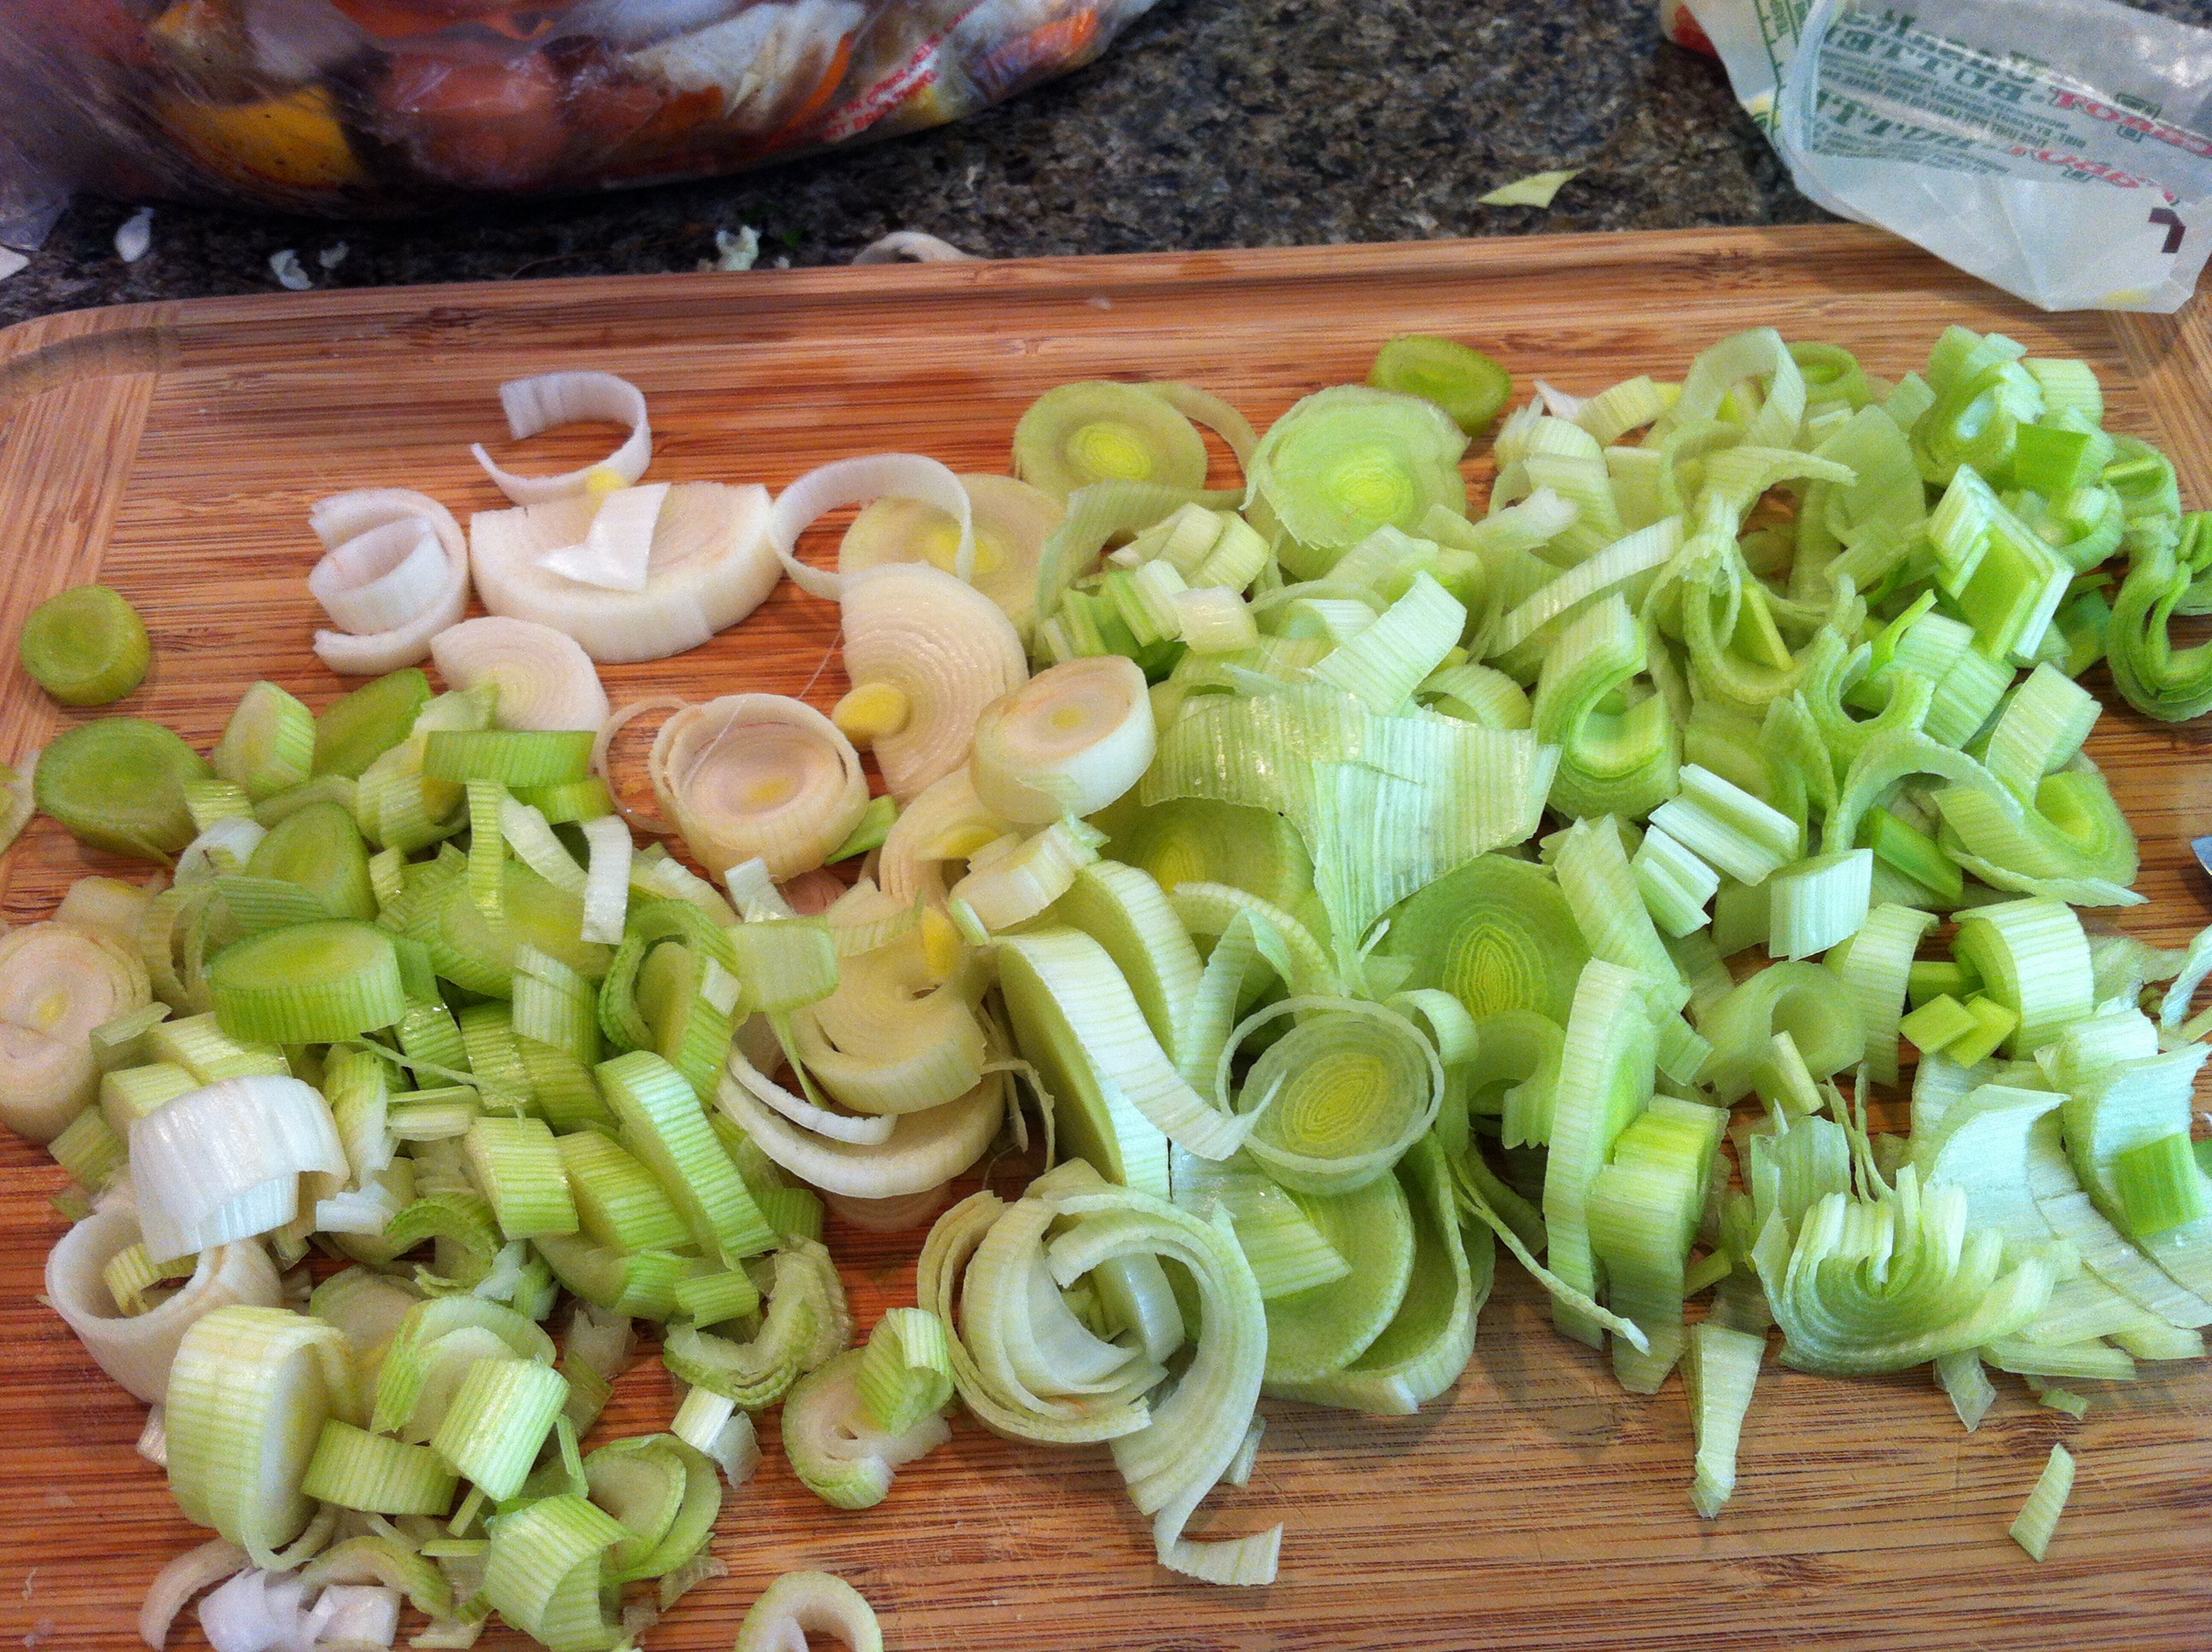 Chopped leeks ready for some butter